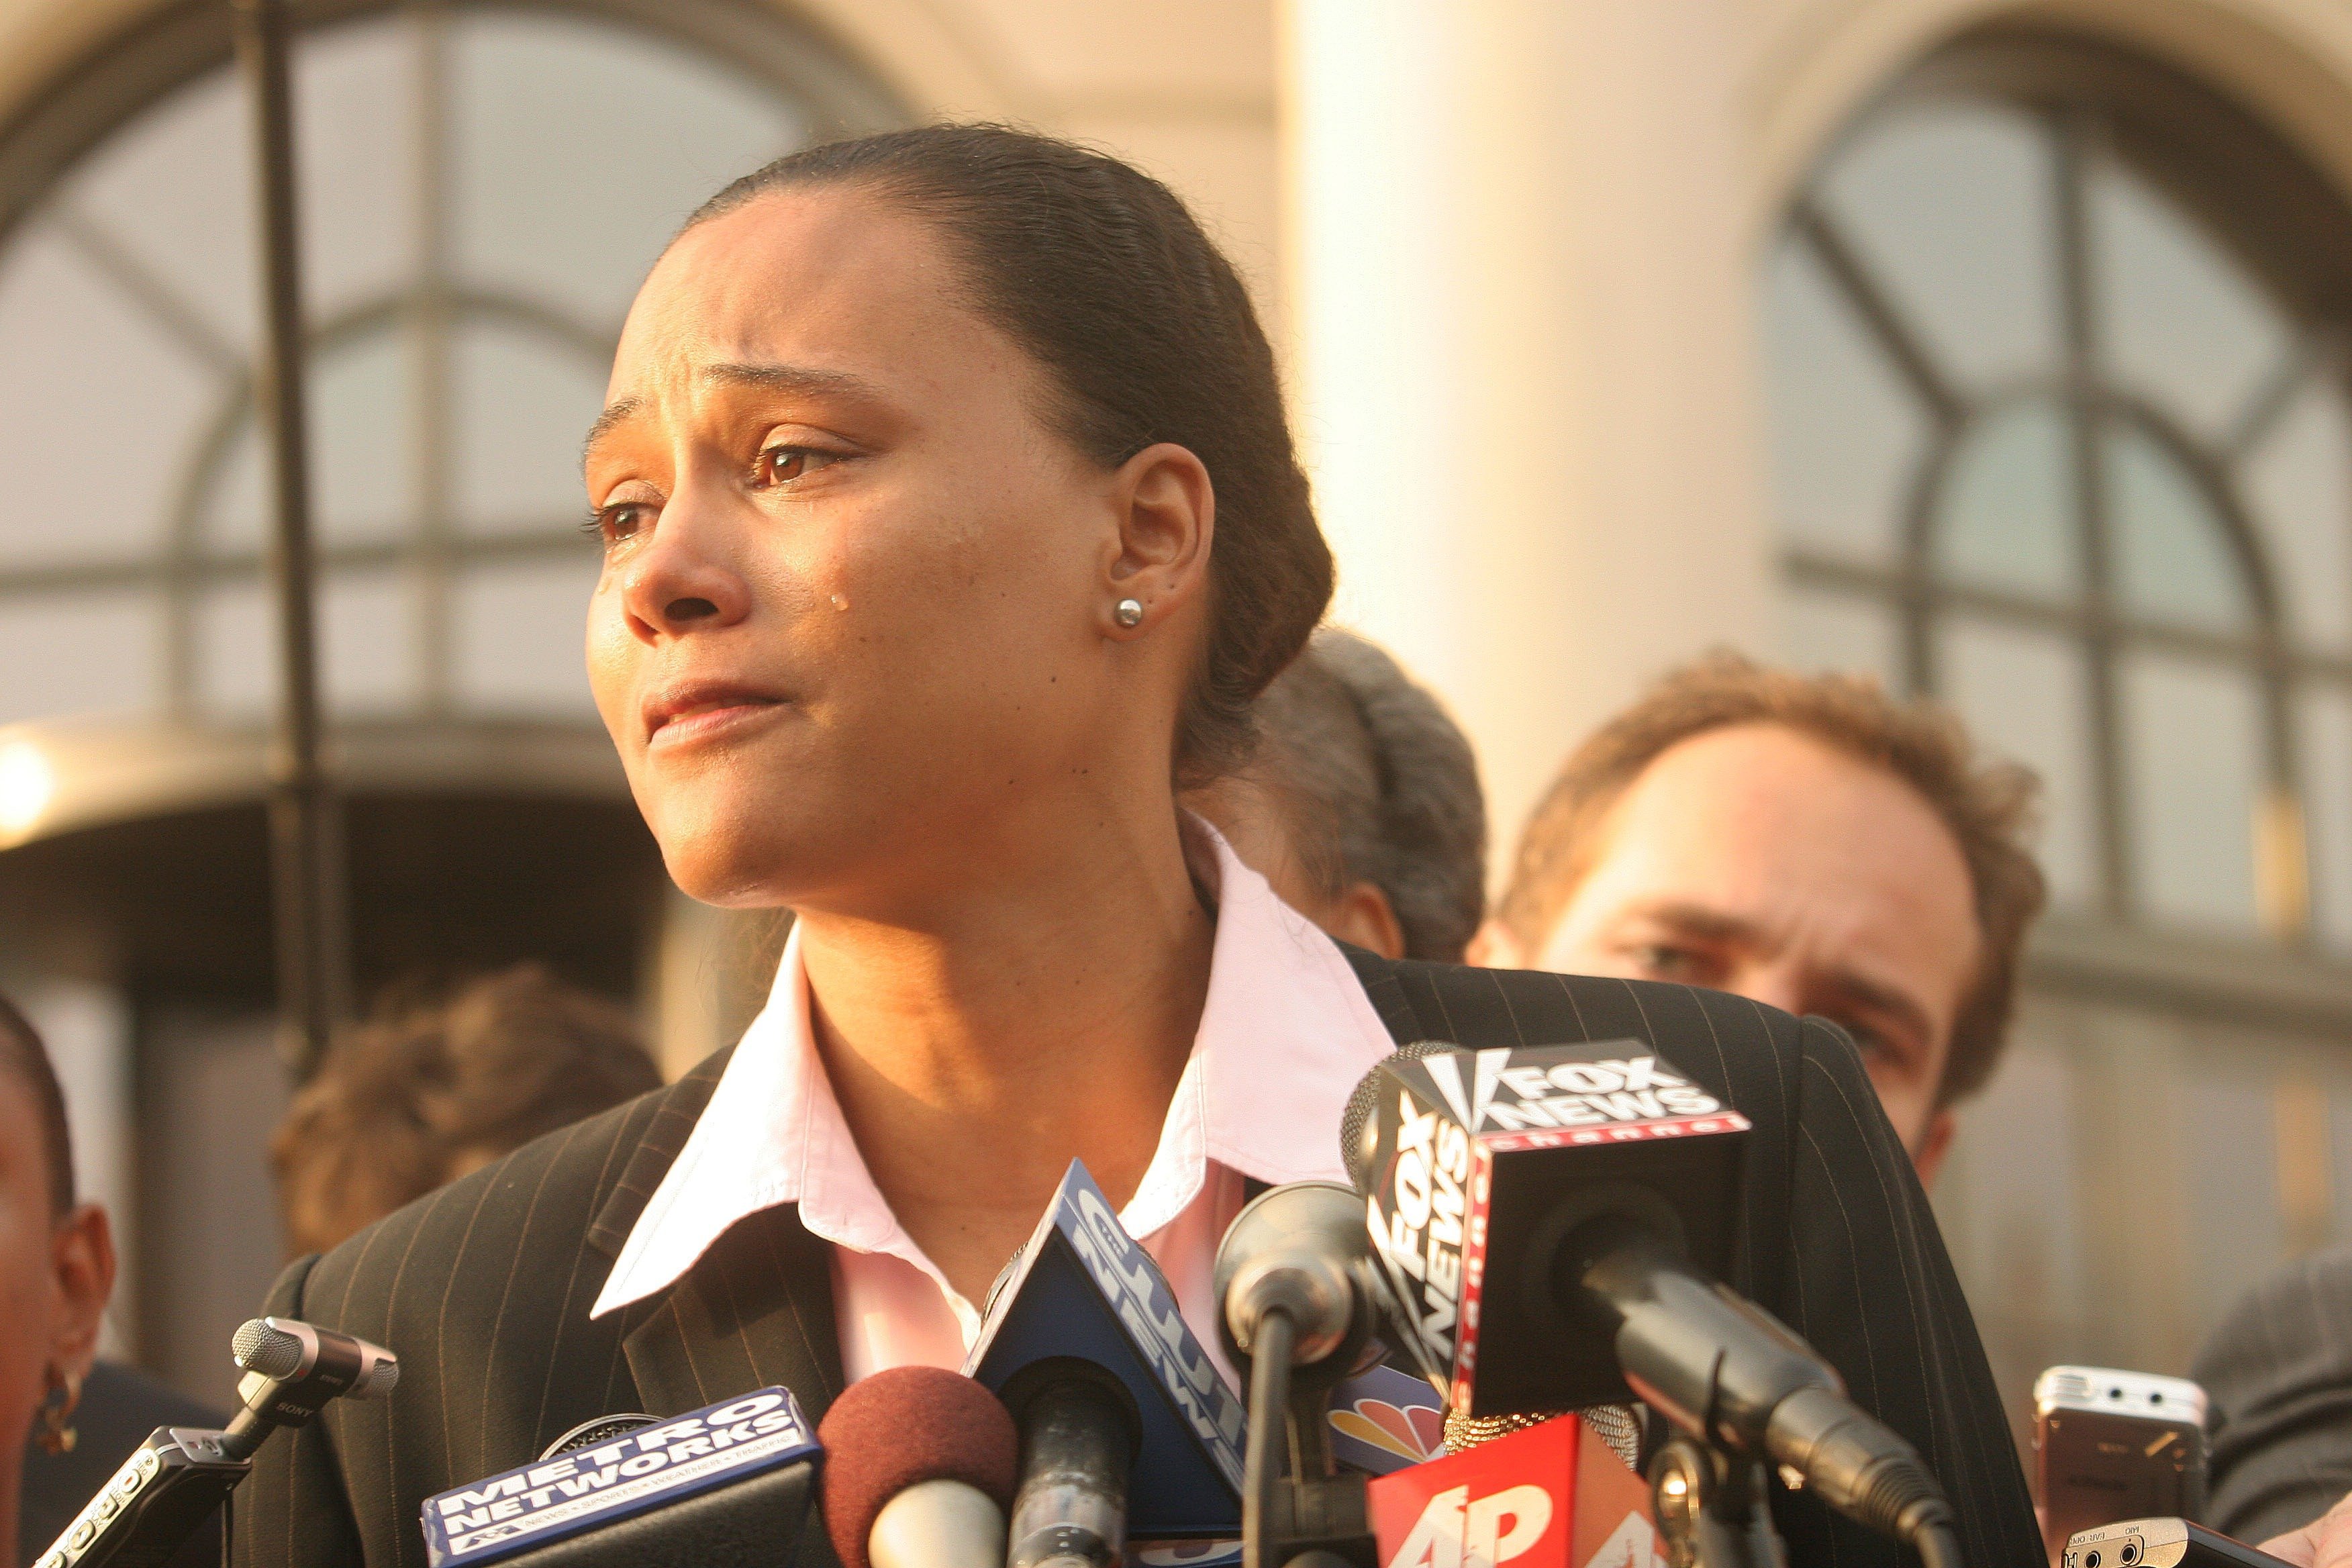 Marion Jones speaks to the media outside a US federal courthouse October 5, 2007, in White Plains, New York | Photo: Hiroko Masuike/Getty Images